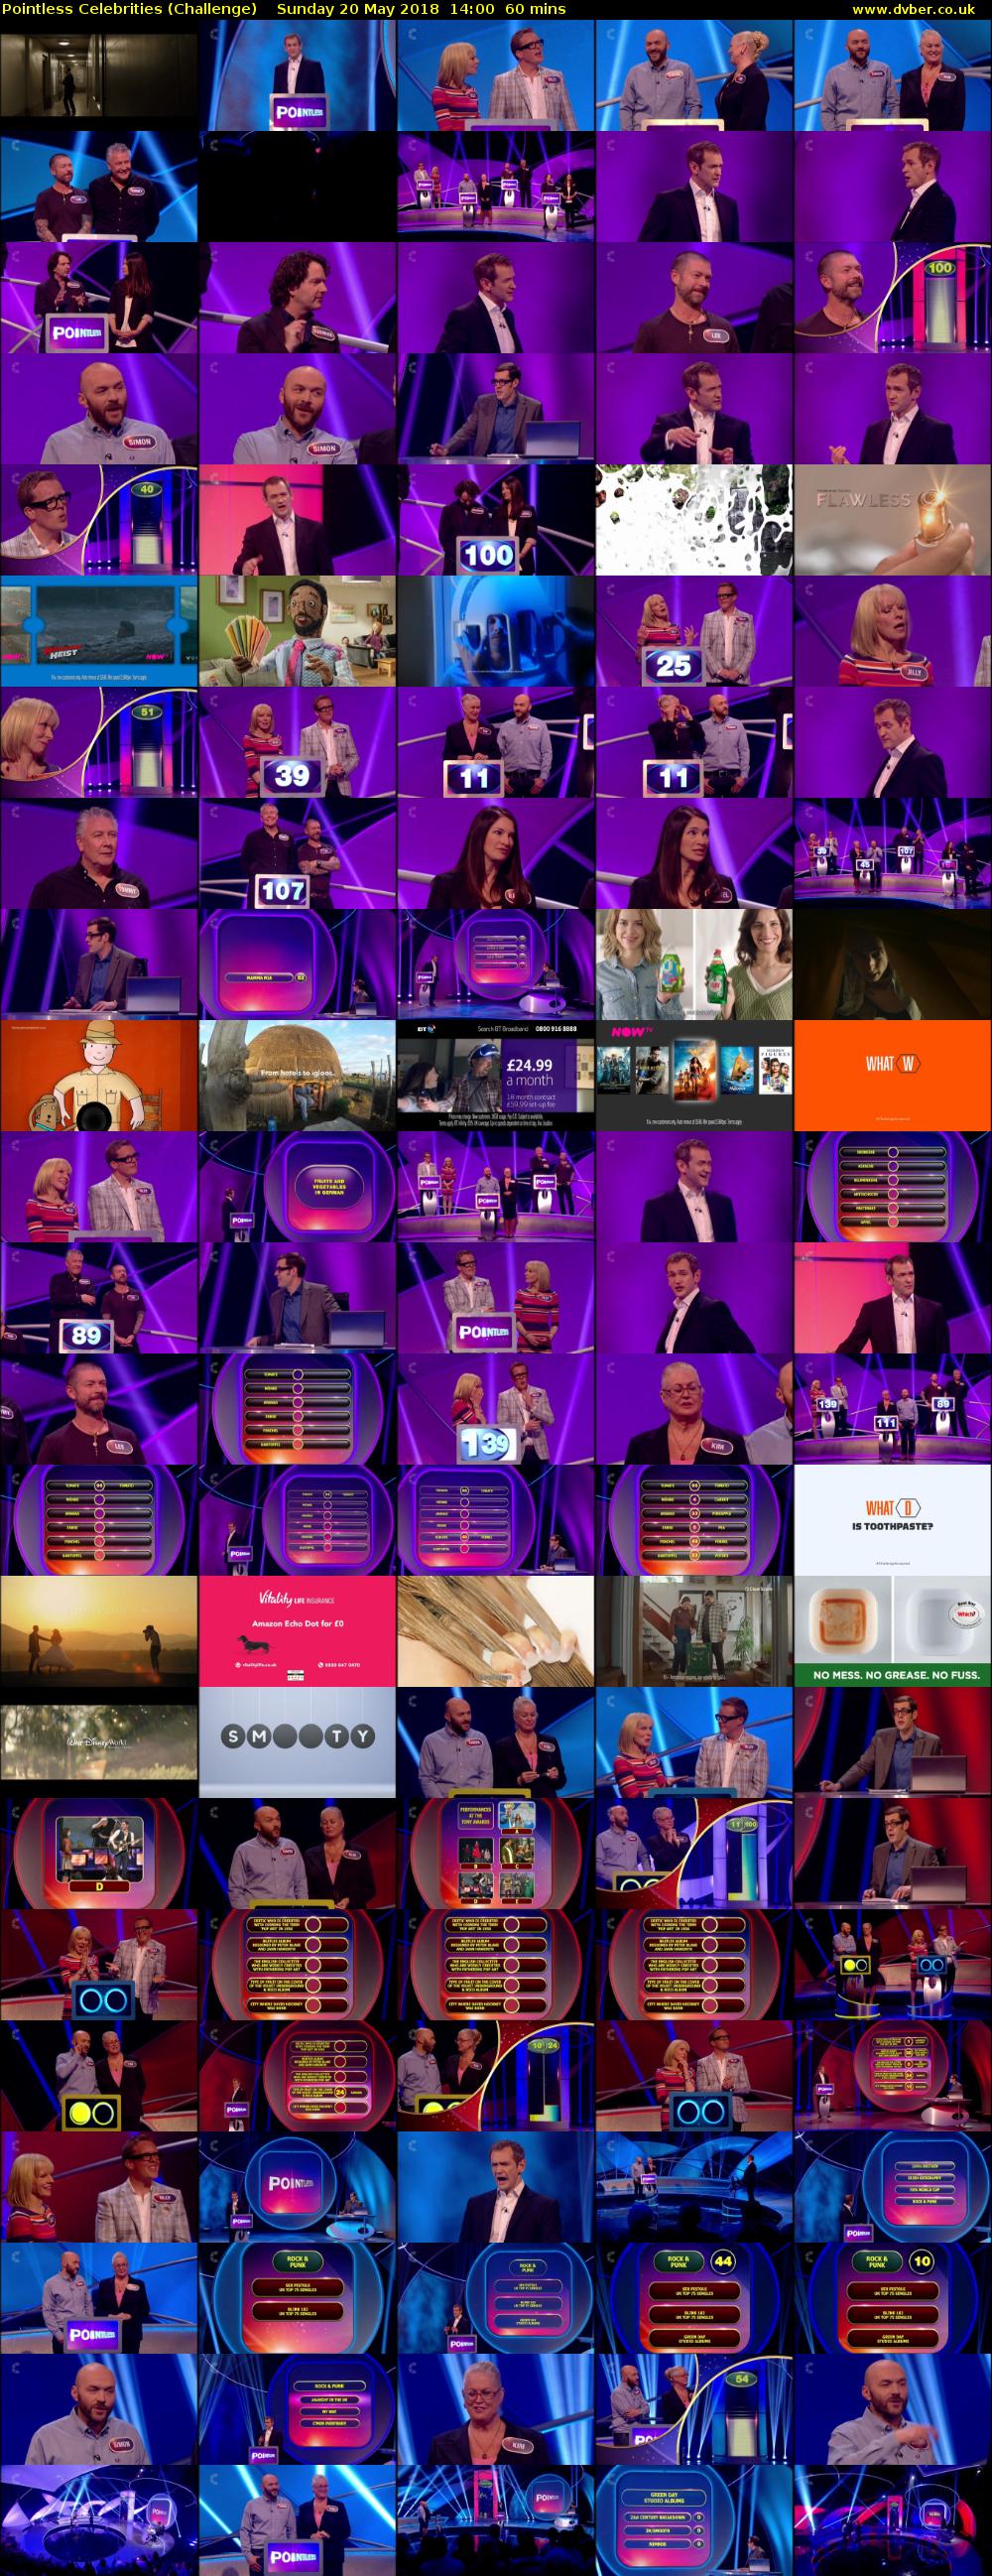 Pointless Celebrities (Challenge) Sunday 20 May 2018 14:00 - 15:00